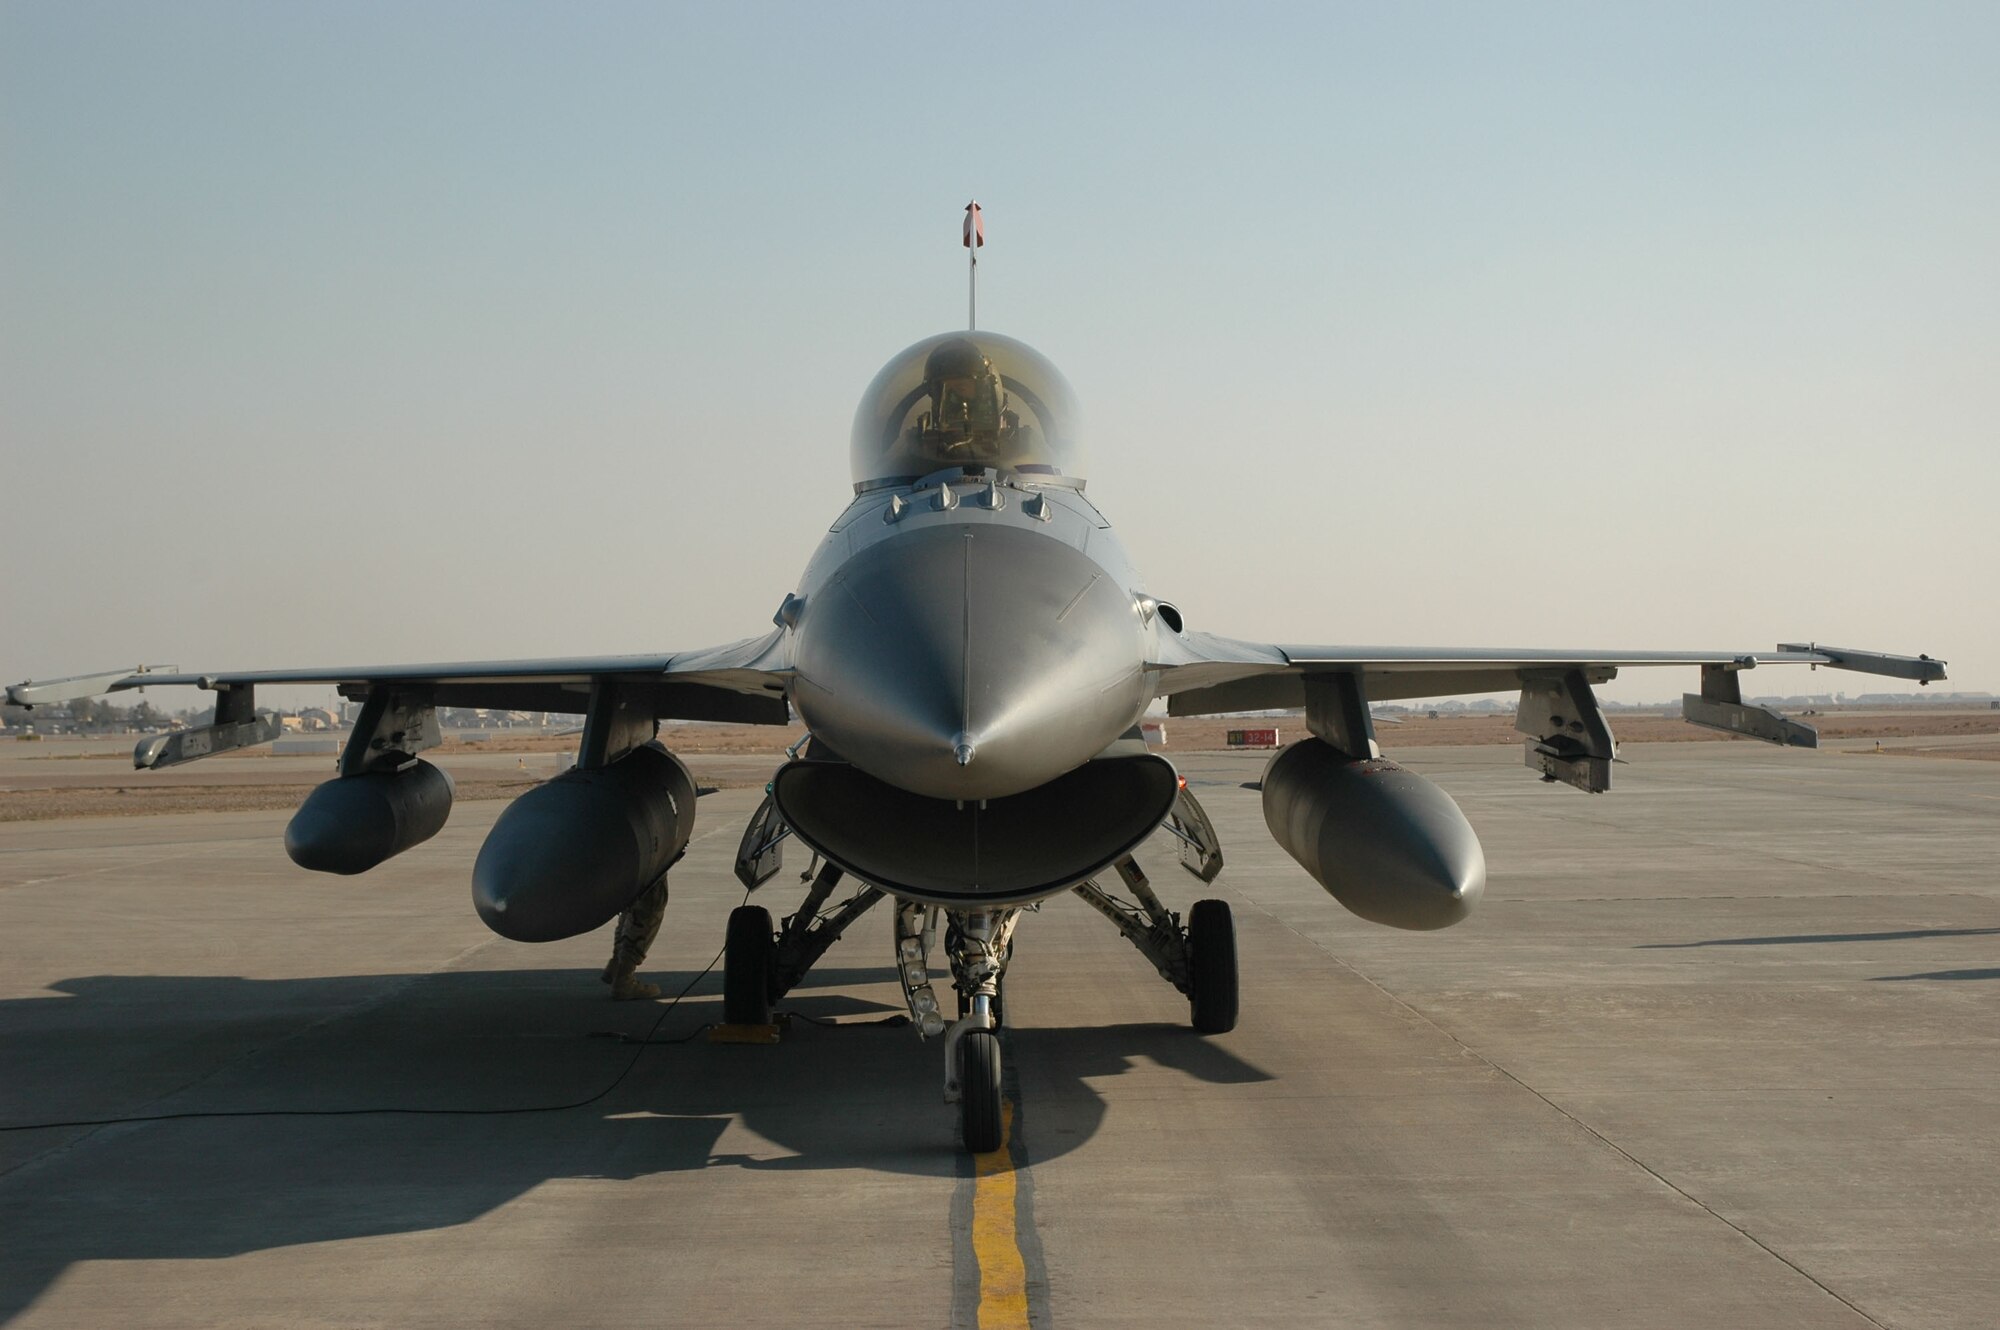 BALAD AIR BASE, Iraq -- An F-16 Block 50 F-16 aircraft sits on the flightline. The 14th Expeditionary Figher Squadron is the first Block 50 F-16 squadron deployed to Iraq. The 332nd Air Expeditionary Wing announced the opening of a third assigned fighter squadron in a ceremony here Jan. 16. (Courtesy photo) 